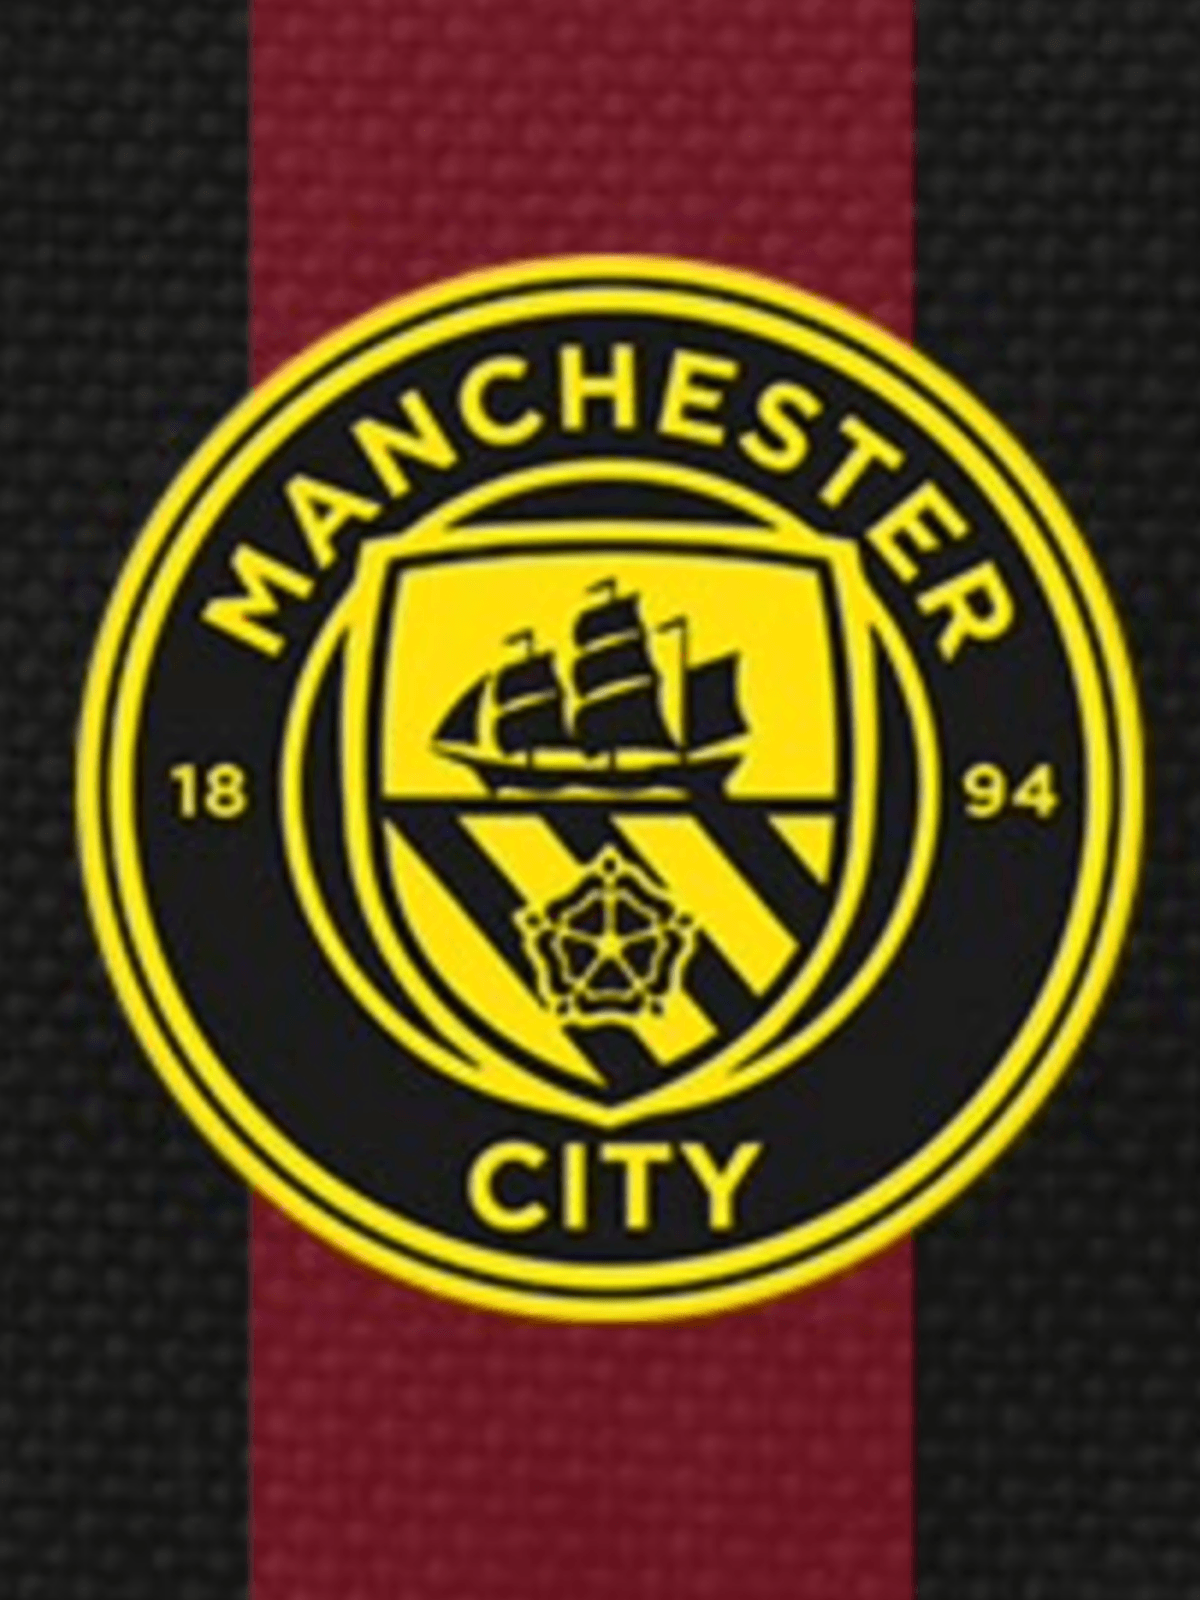 Yellow City Logo - New away kit revealed | Page 27 | Bluemoon MCFC | The leading ...